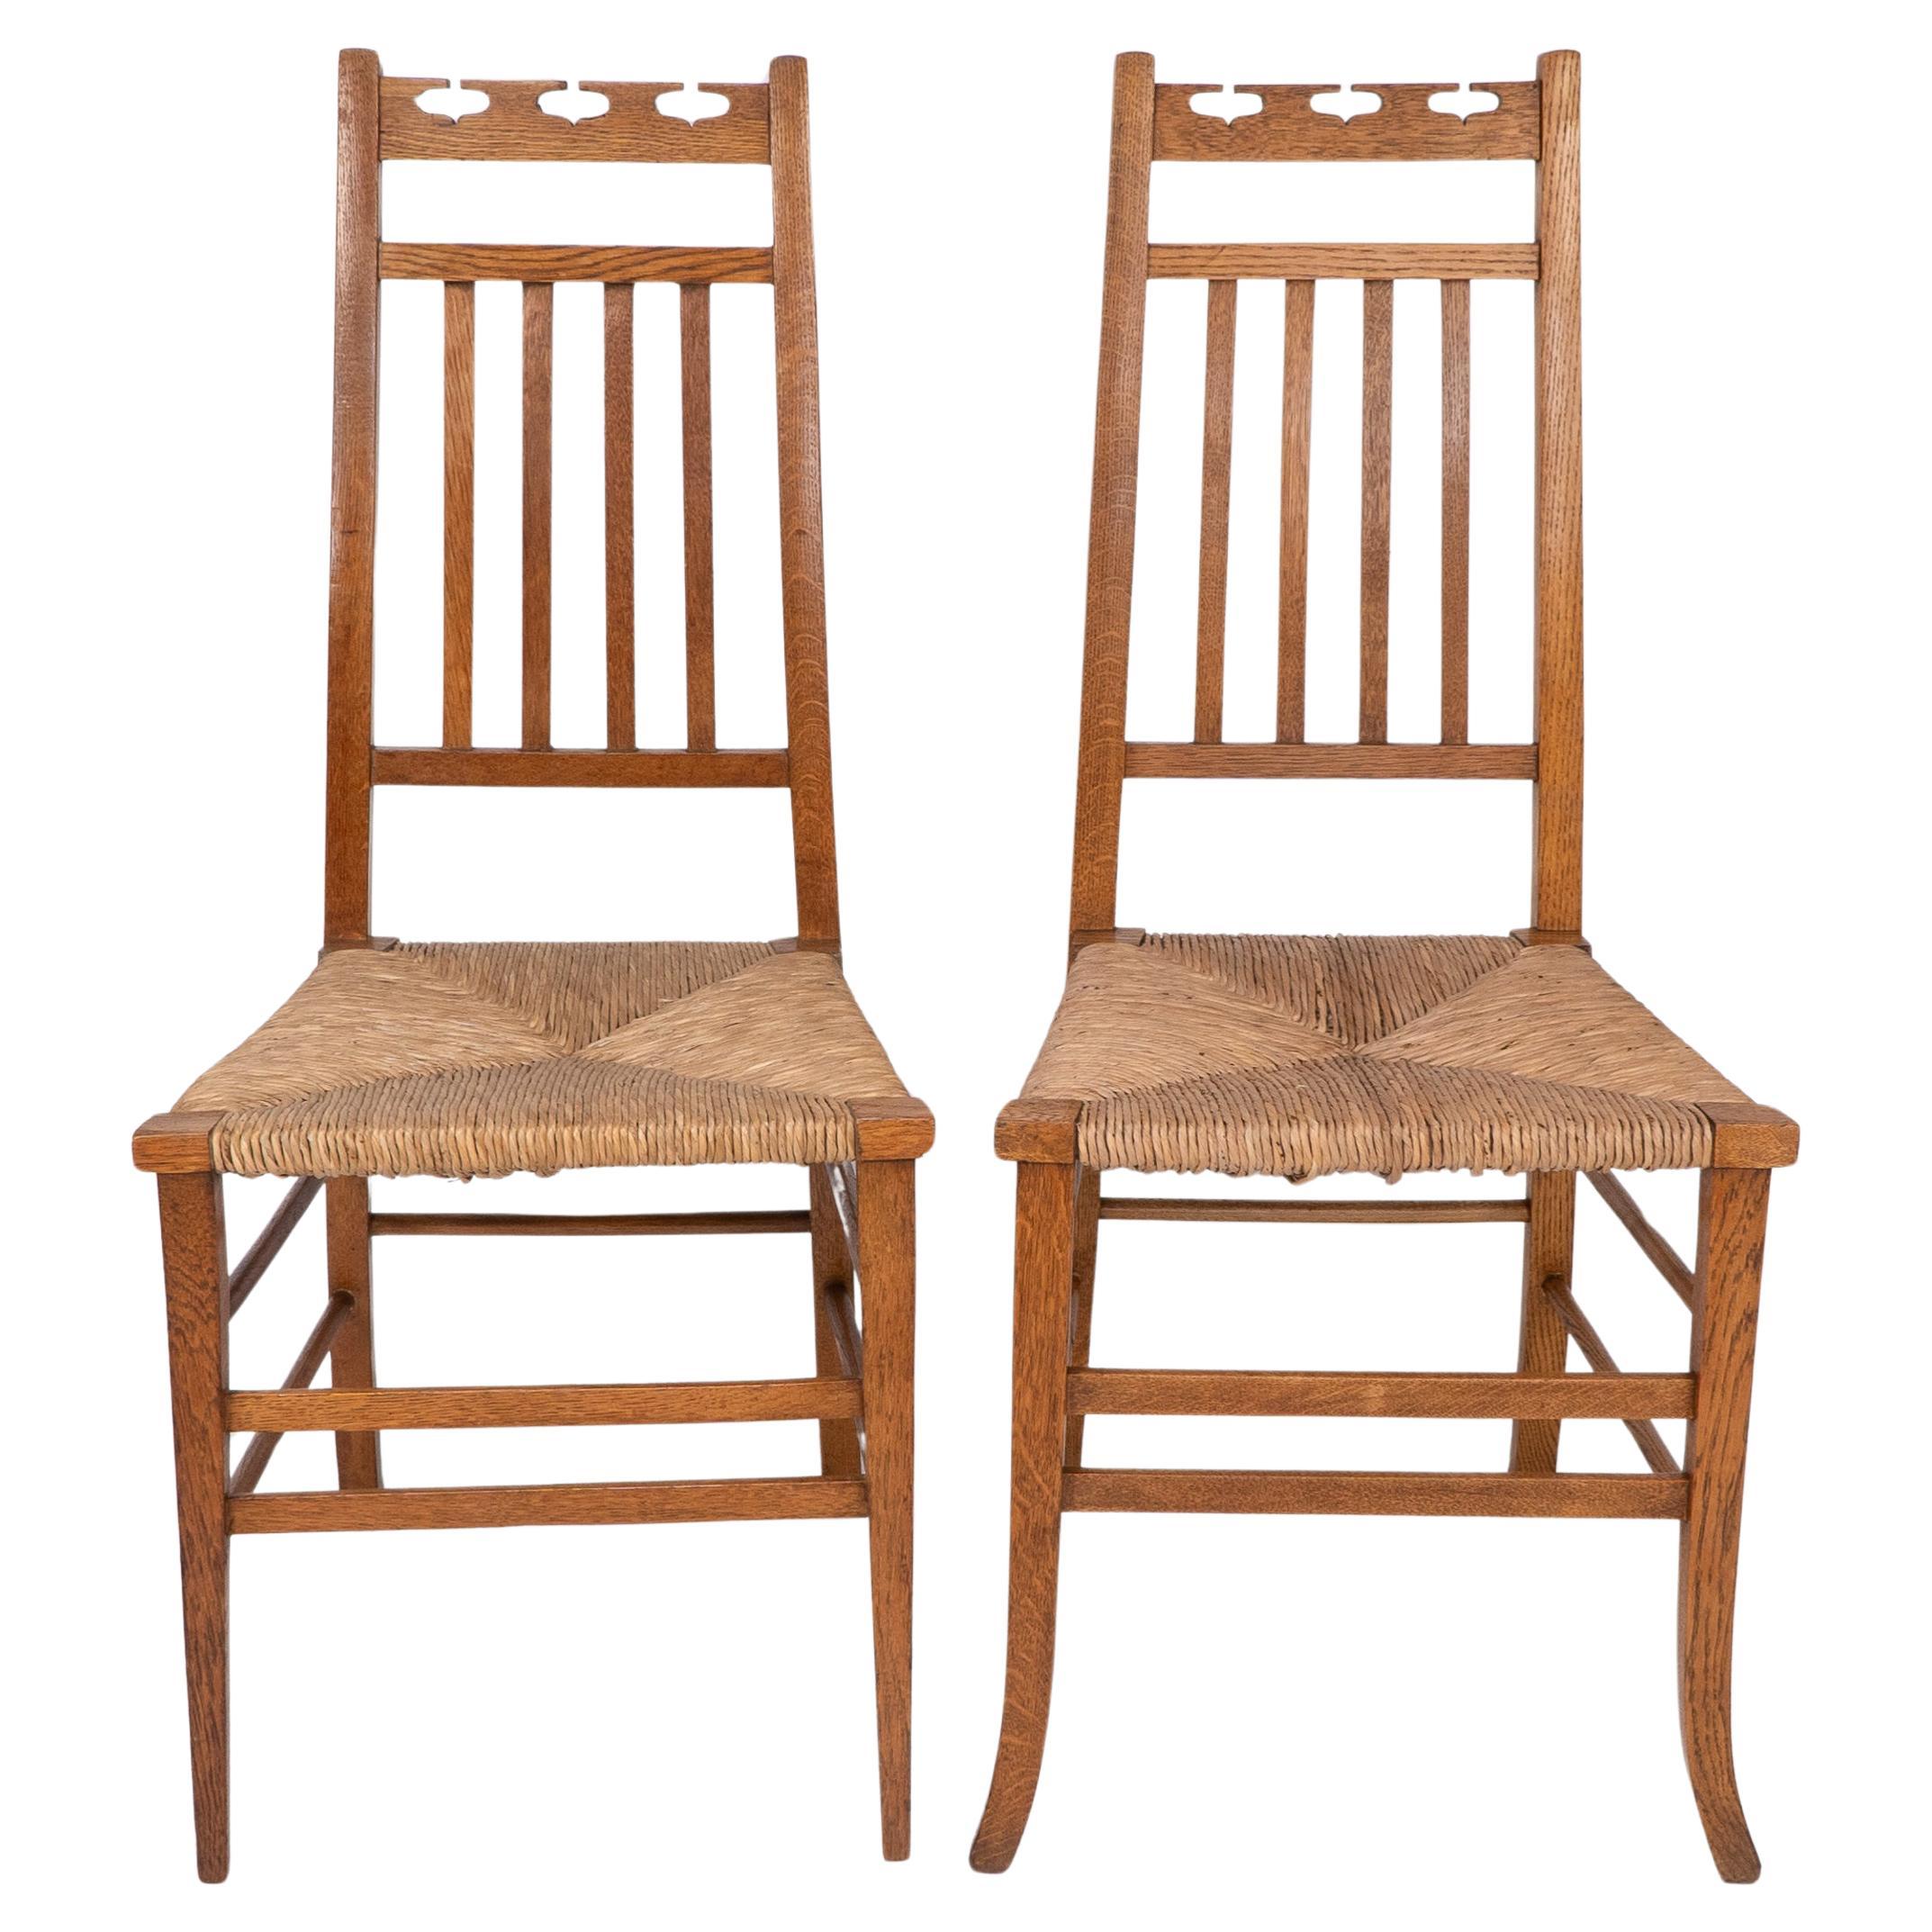 E A Taylor attri for Wylie & Lochhead. A pair of Arts & Crafts side chairs For Sale